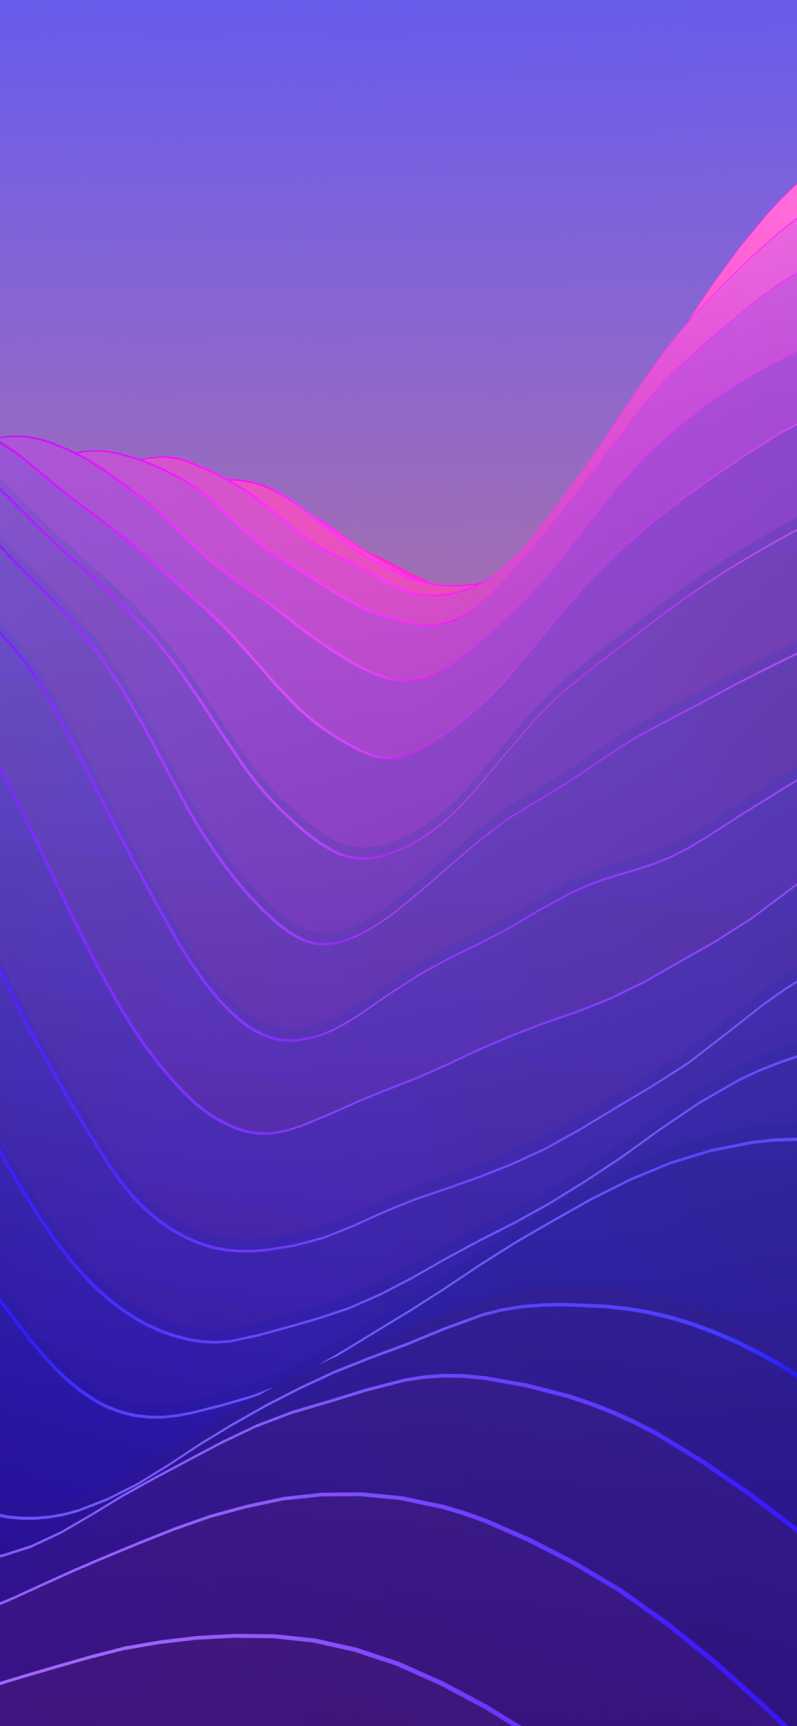 Iphone X Wallpapers